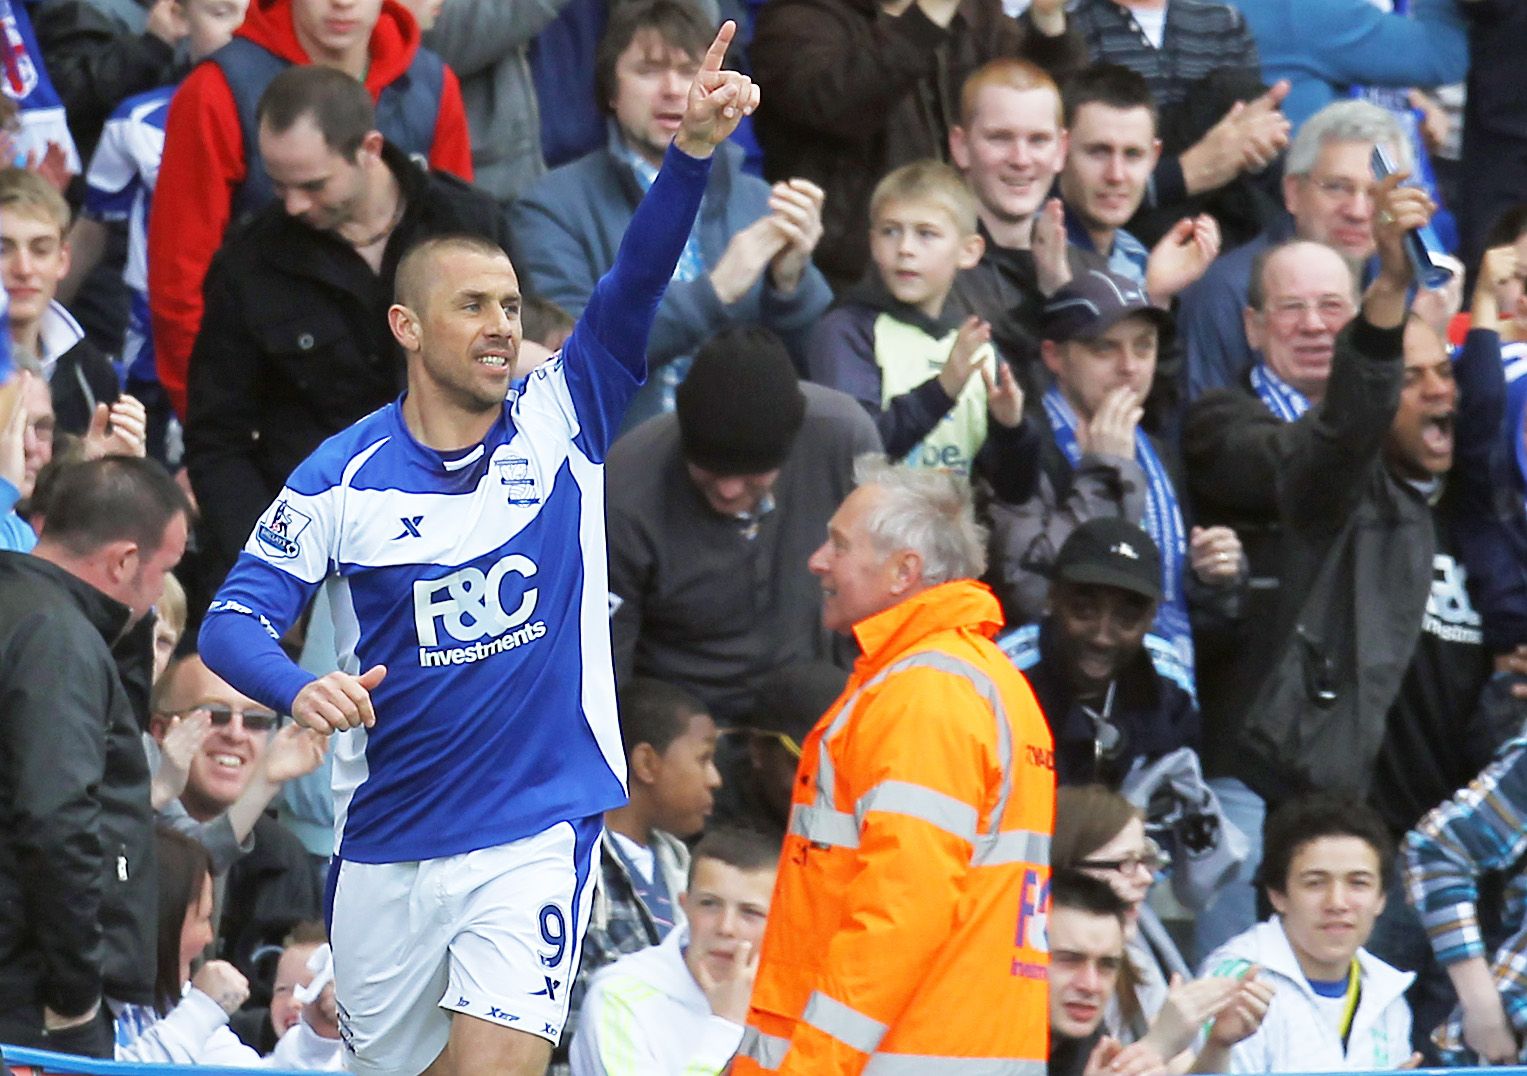 Football - Birmingham City v Bolton Wanderers Barclays Premier League - St Andrews - 10/11 - 2/4/11 
Birmingham's Kevin Phillips celebrates scoring his teams first goal 
Mandatory Credit: Action Images / Andrew Couldridge 
Livepic 
NO ONLINE/INTERNET USE WITHOUT A LICENCE FROM THE FOOTBALL DATA CO LTD. FOR LICENCE ENQUIRIES PLEASE TELEPHONE +44 (0) 207 864 9000.